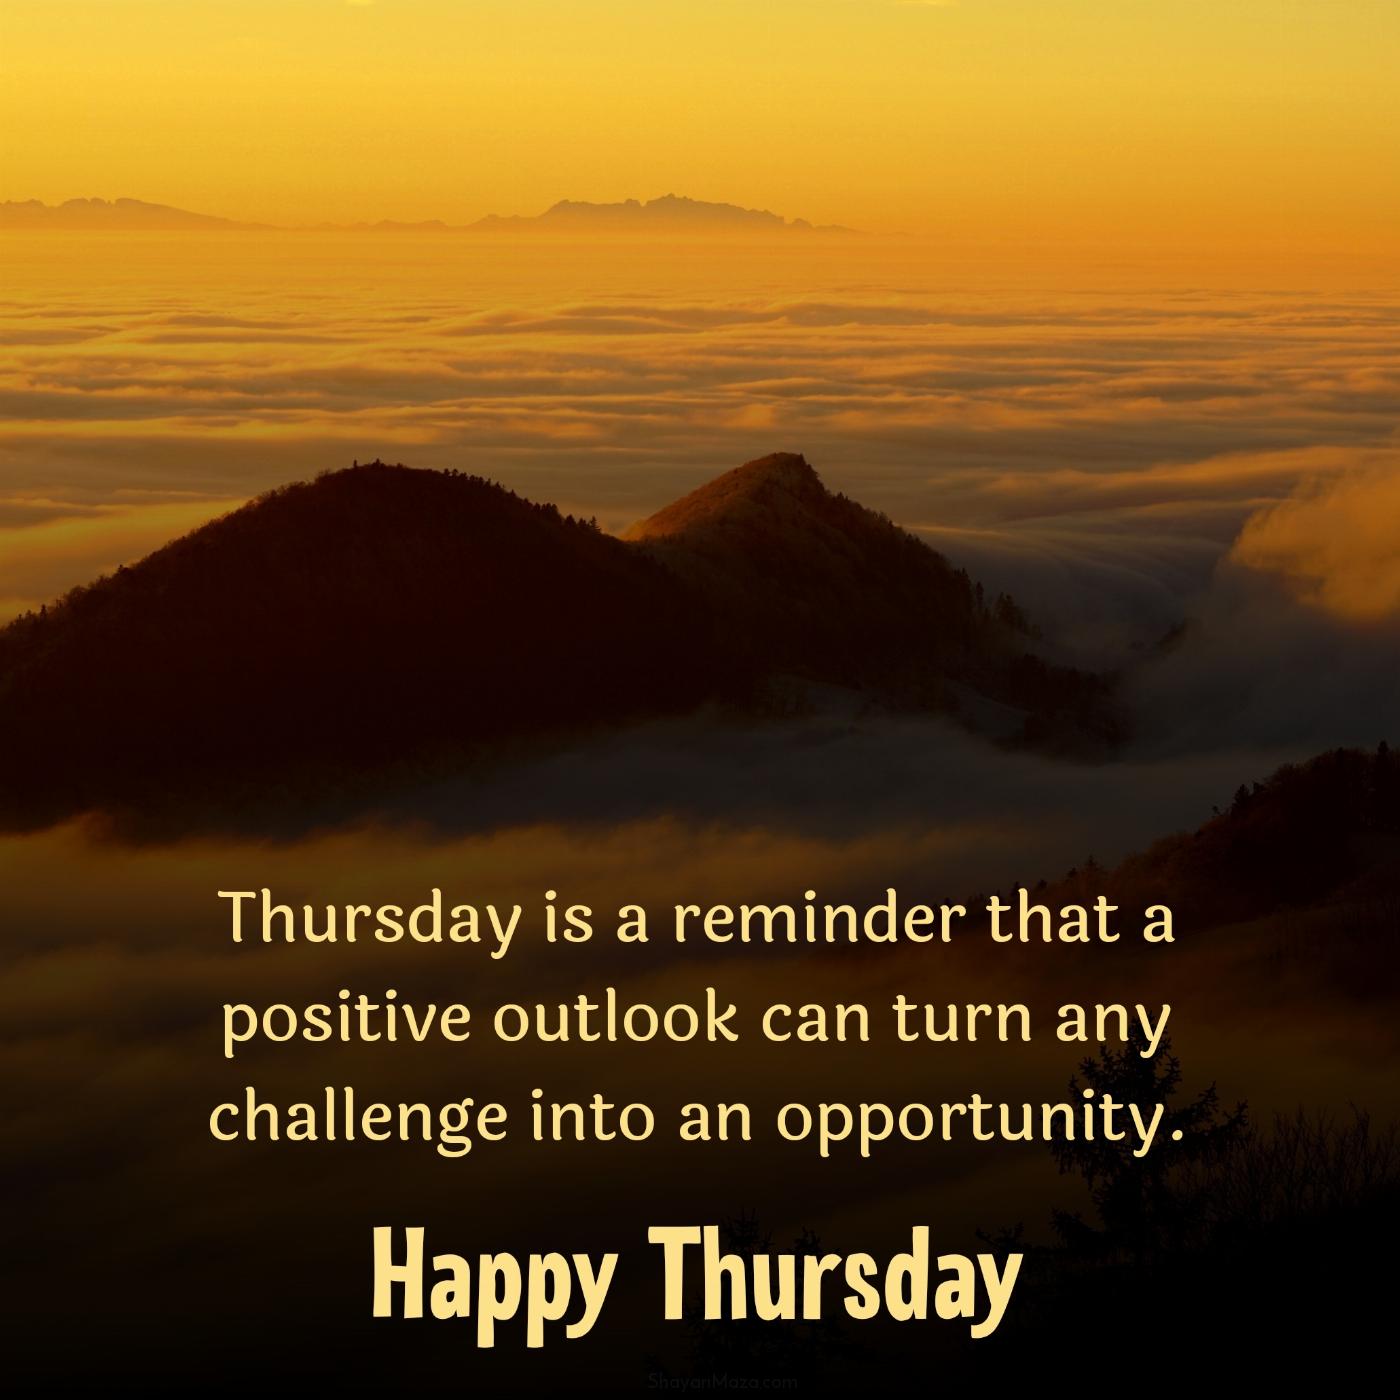 Thursday is a reminder that a positive outlook can turn any challenge